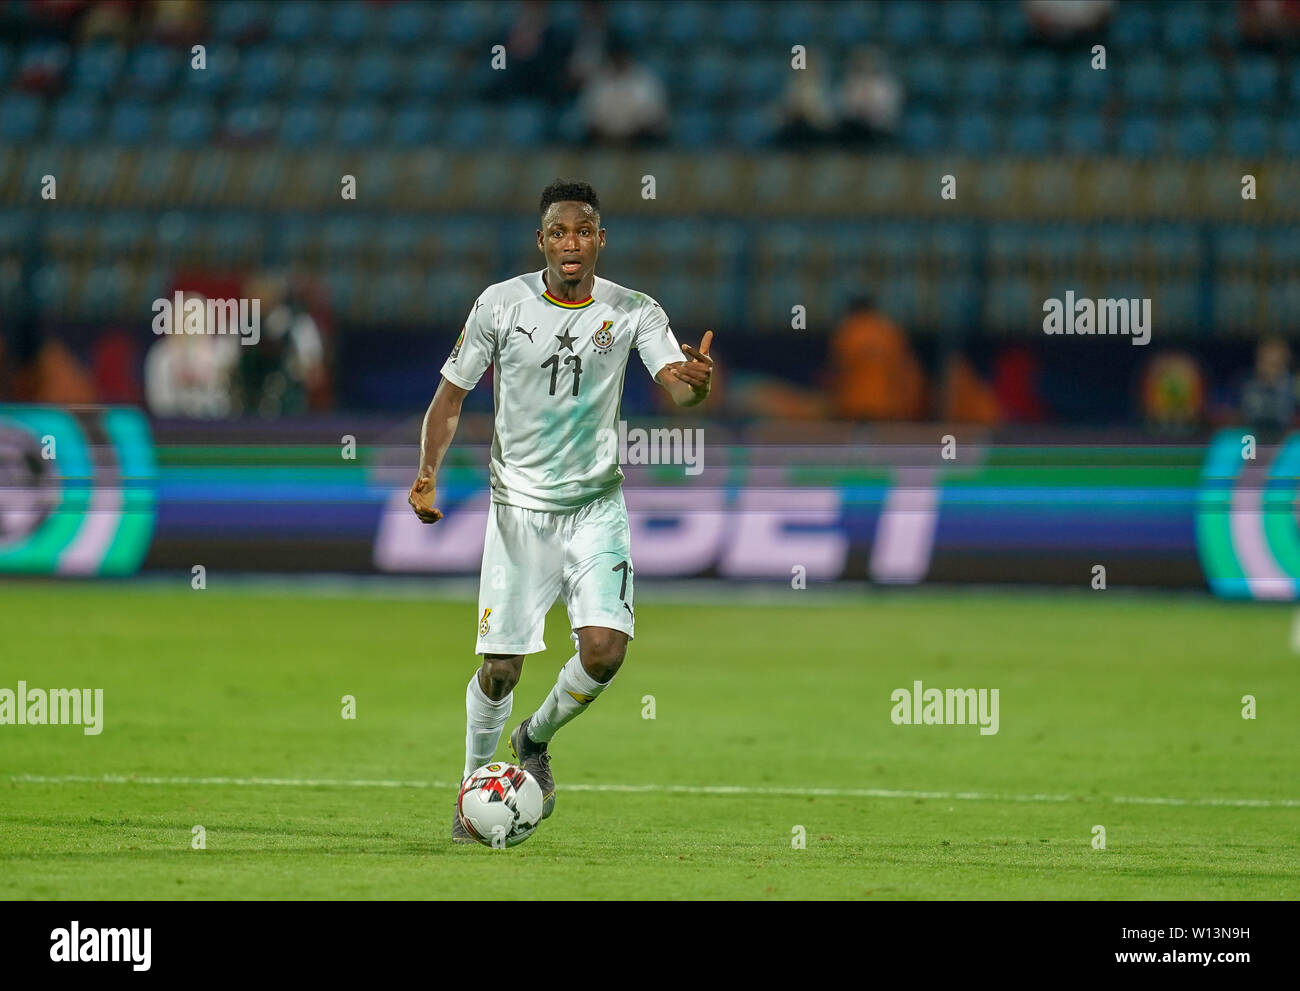 Ismailia, Egypt. 29th June, 2019. Wakaso Mubarak of Ghana during the 2019 African Cup of Nations match between Benin and Guinea-Bissau at the Ismailia stadium in Ismailia, Egypt. Ulrik Pedersen/CSM/Alamy Live News Stock Photo